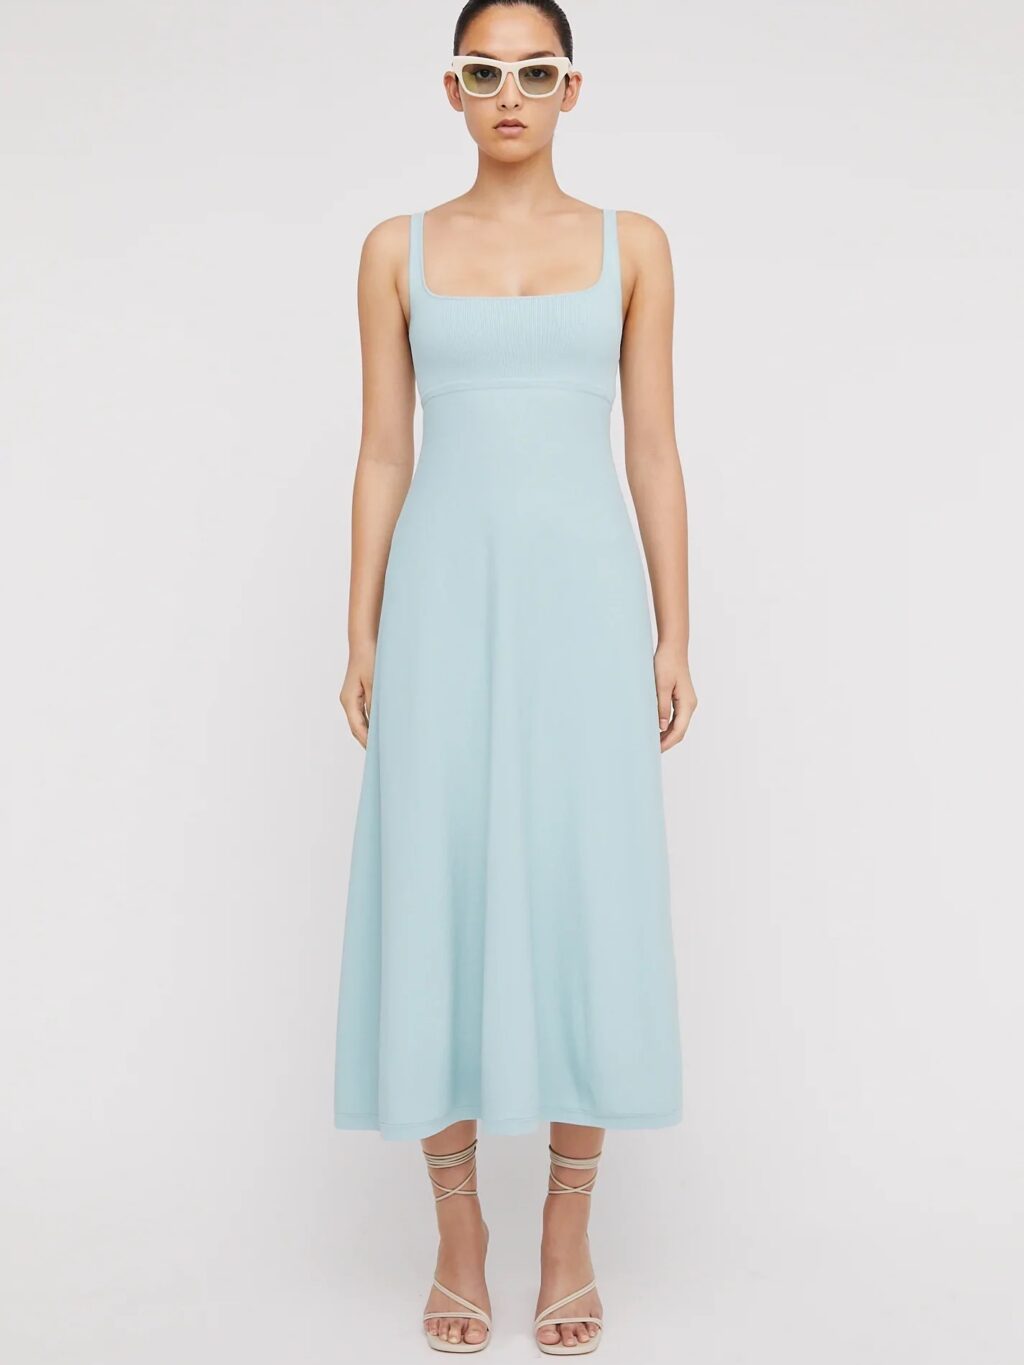 Scanlan Theodore Crepe Knit Square Neck Dress in Blue for hire.